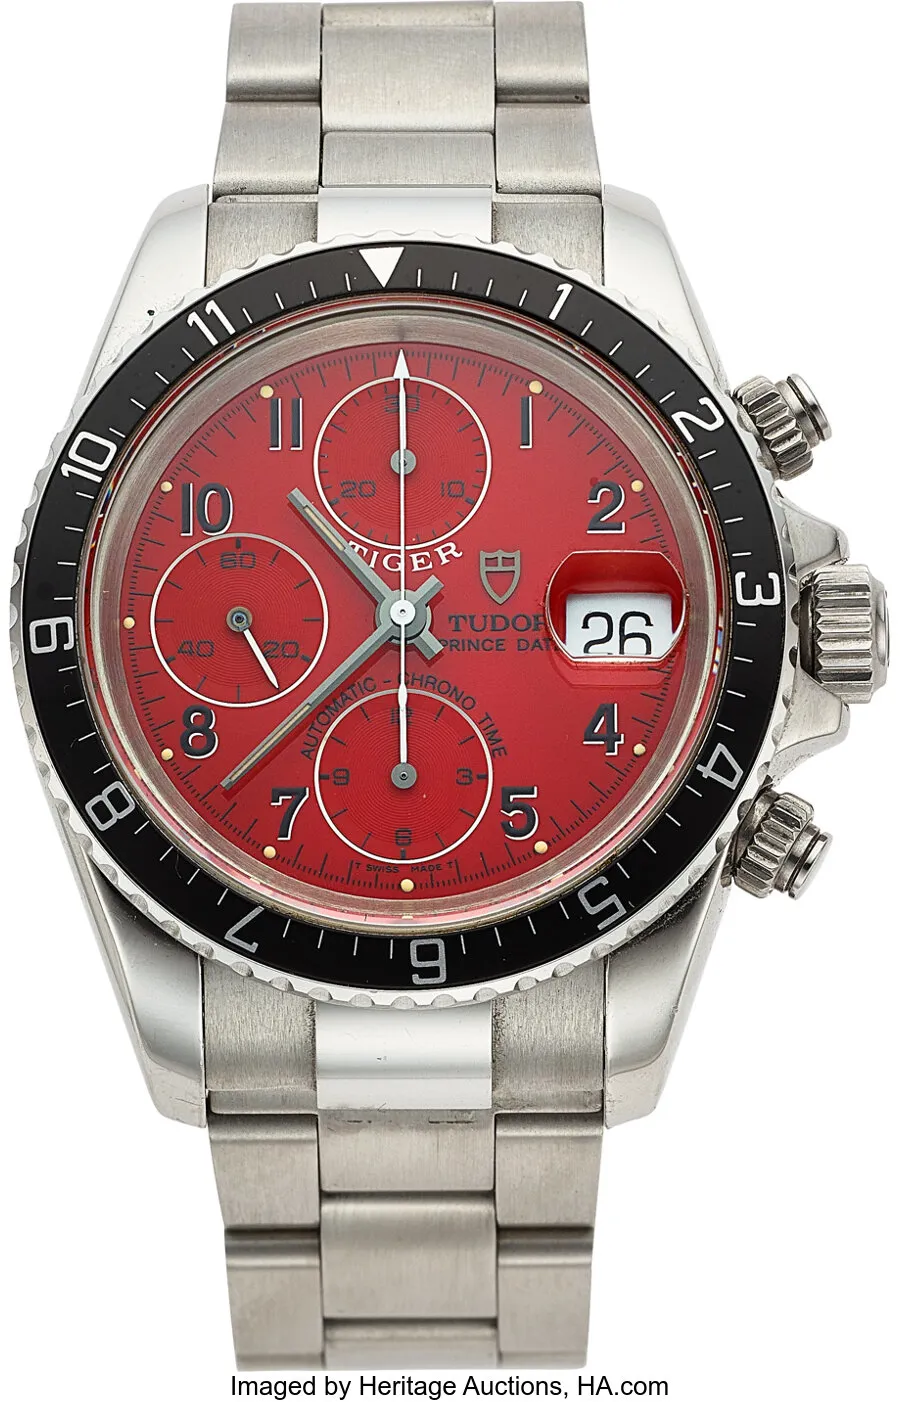 Tudor Tiger Prince Date 79270 40mm Stainless steel Red